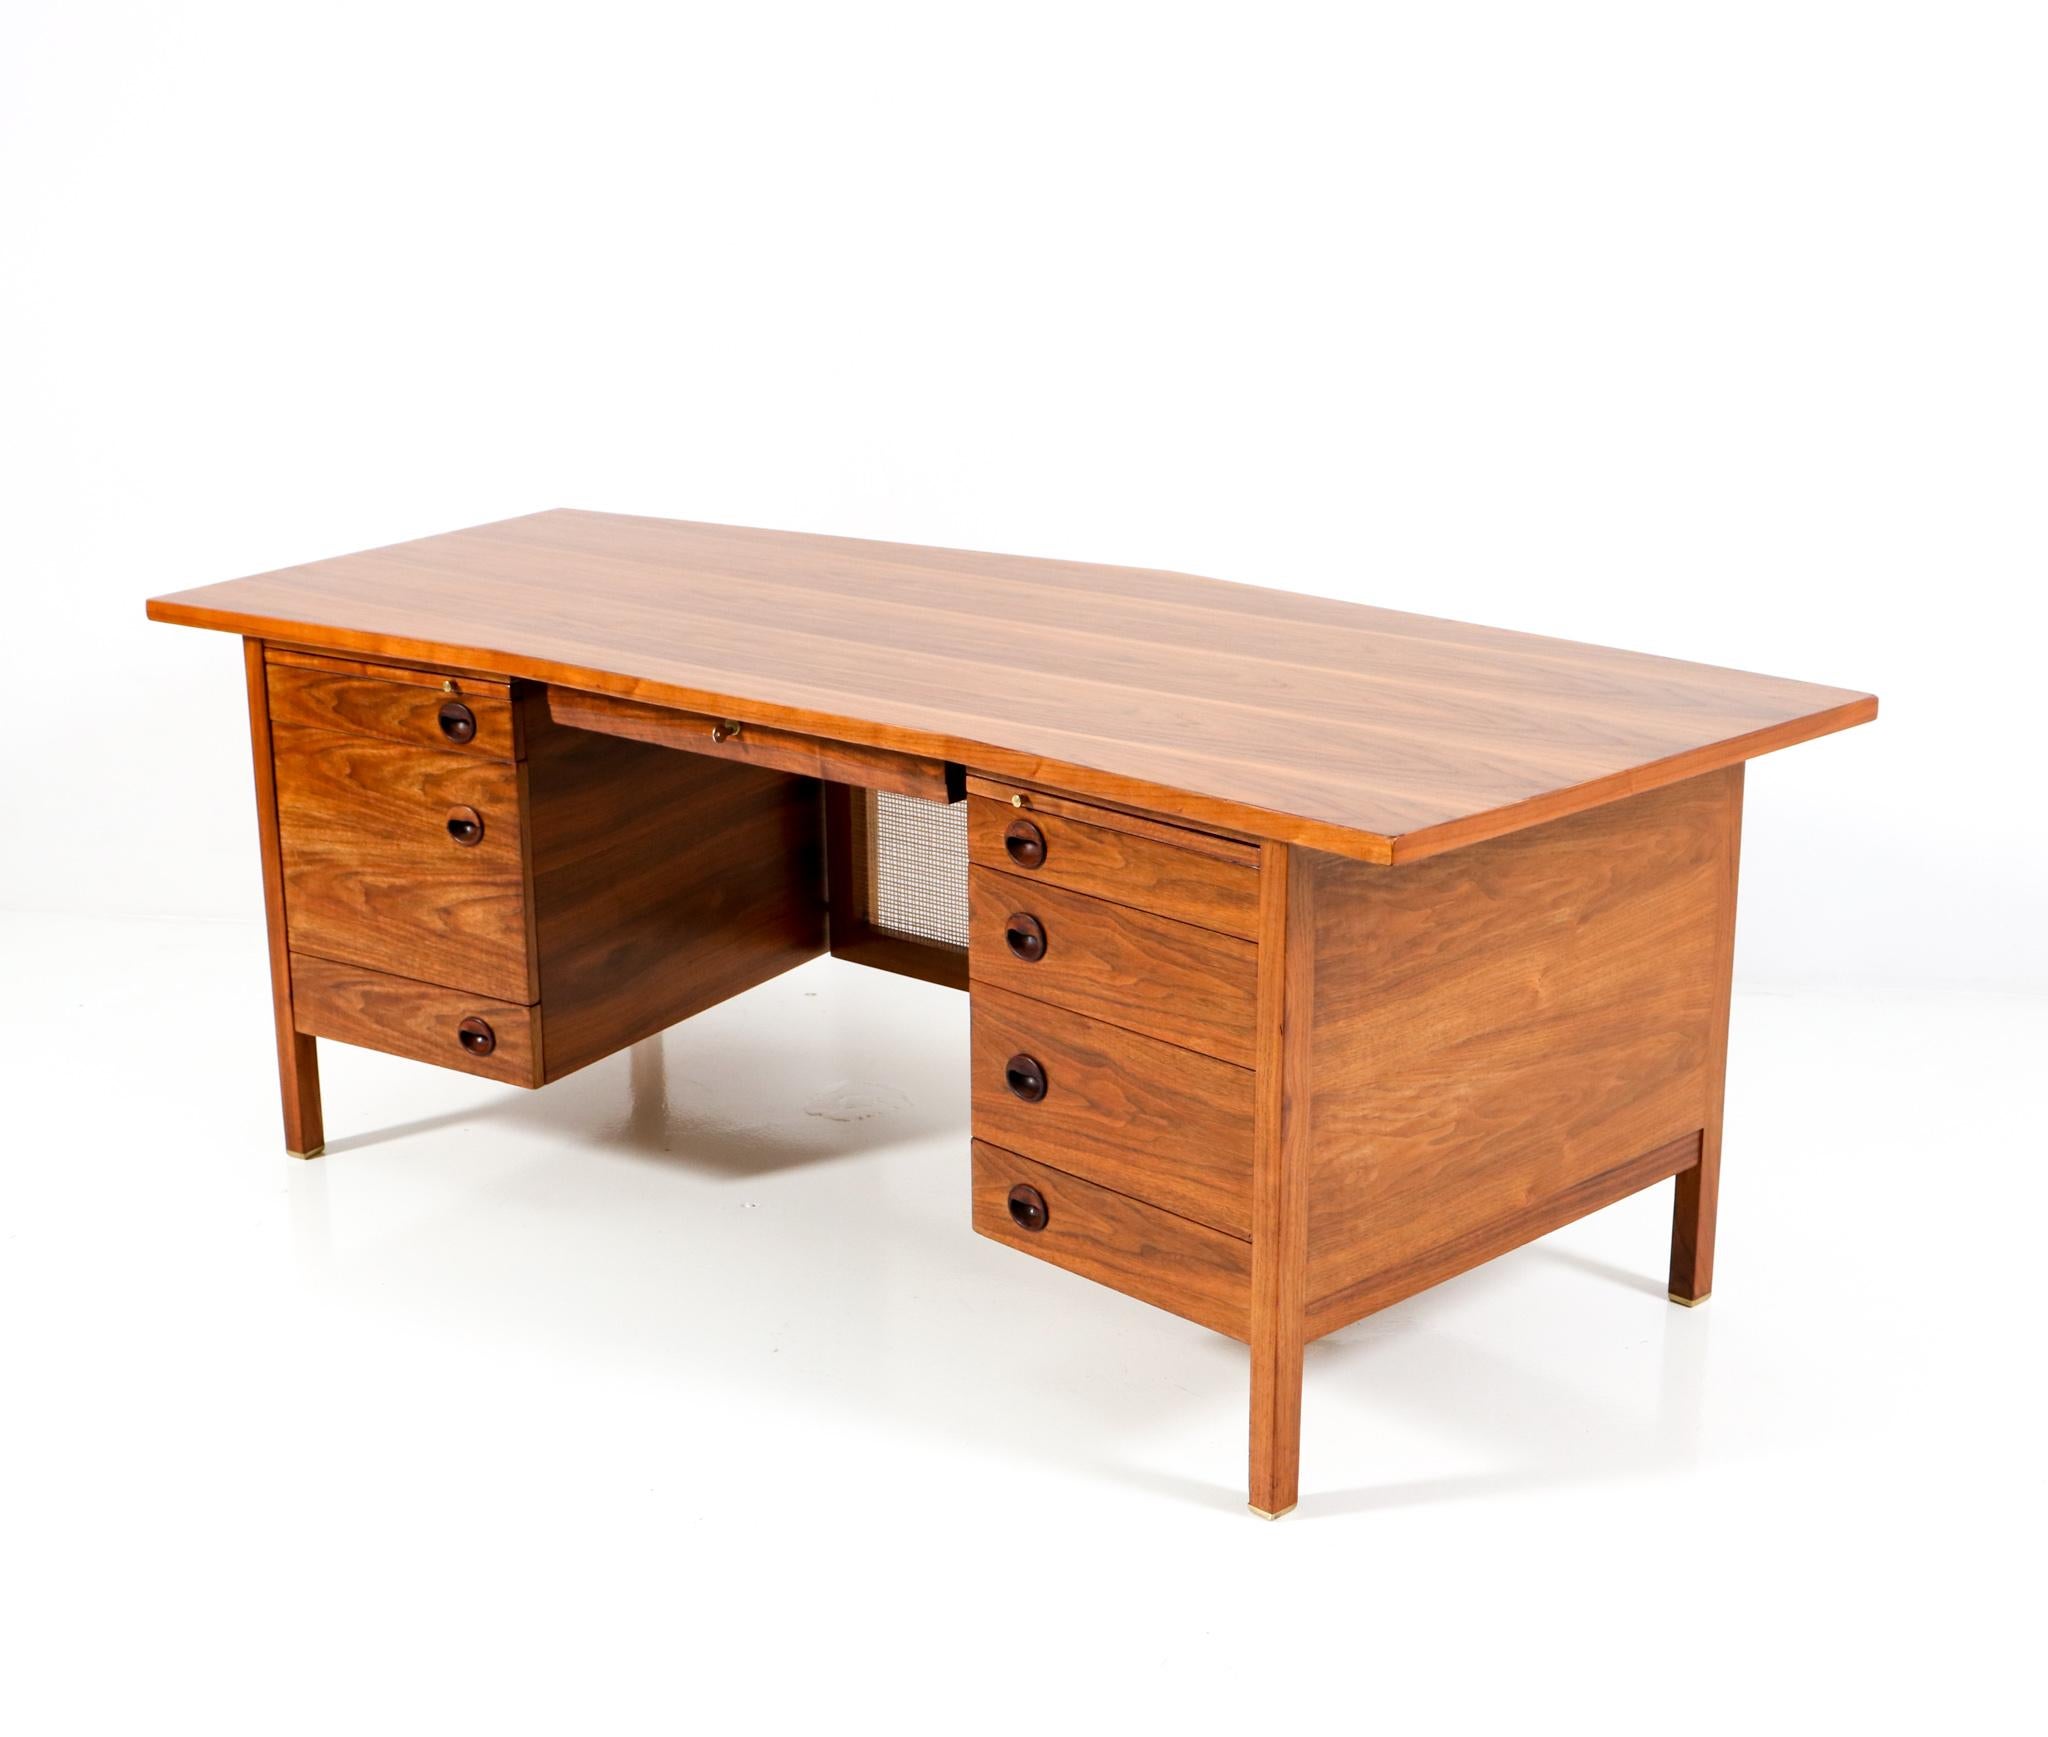 Magnificent and ultra rare Mid-Century Modern executive desk. Design by Edward Wormley for Dunbar Furniture United States. Striking American design from the 1950s. Solid walnut base on brass feet. Original walnut veneered top. Eight original drawers